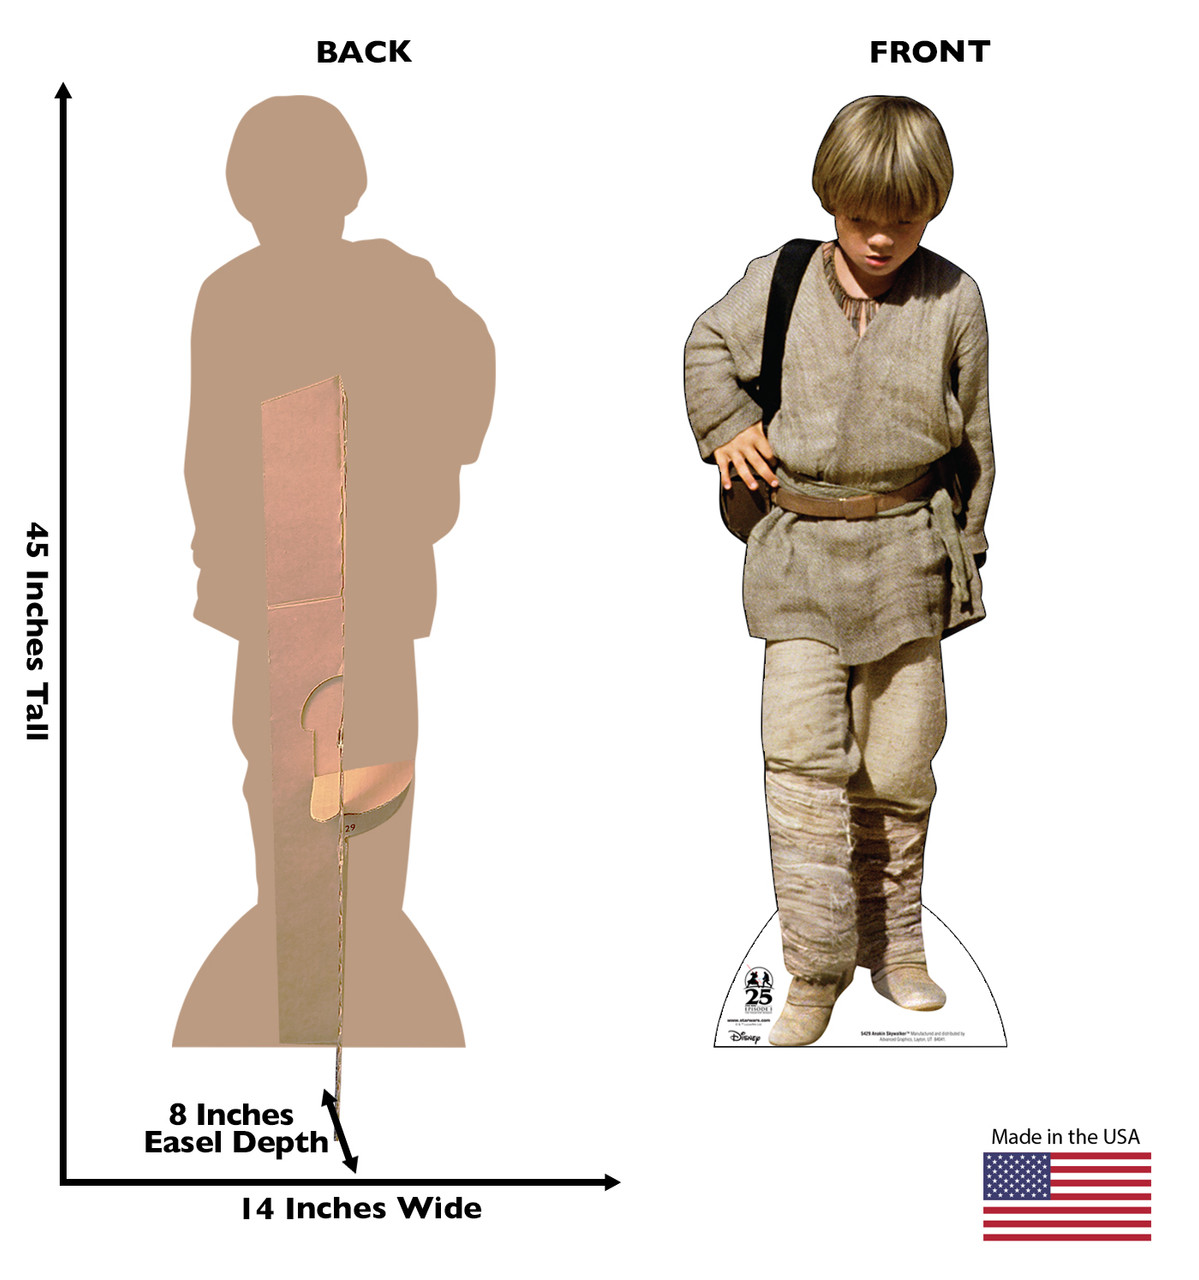 Life-size cardboard standee of Anakin Skywalker™ with back and front dimensions.